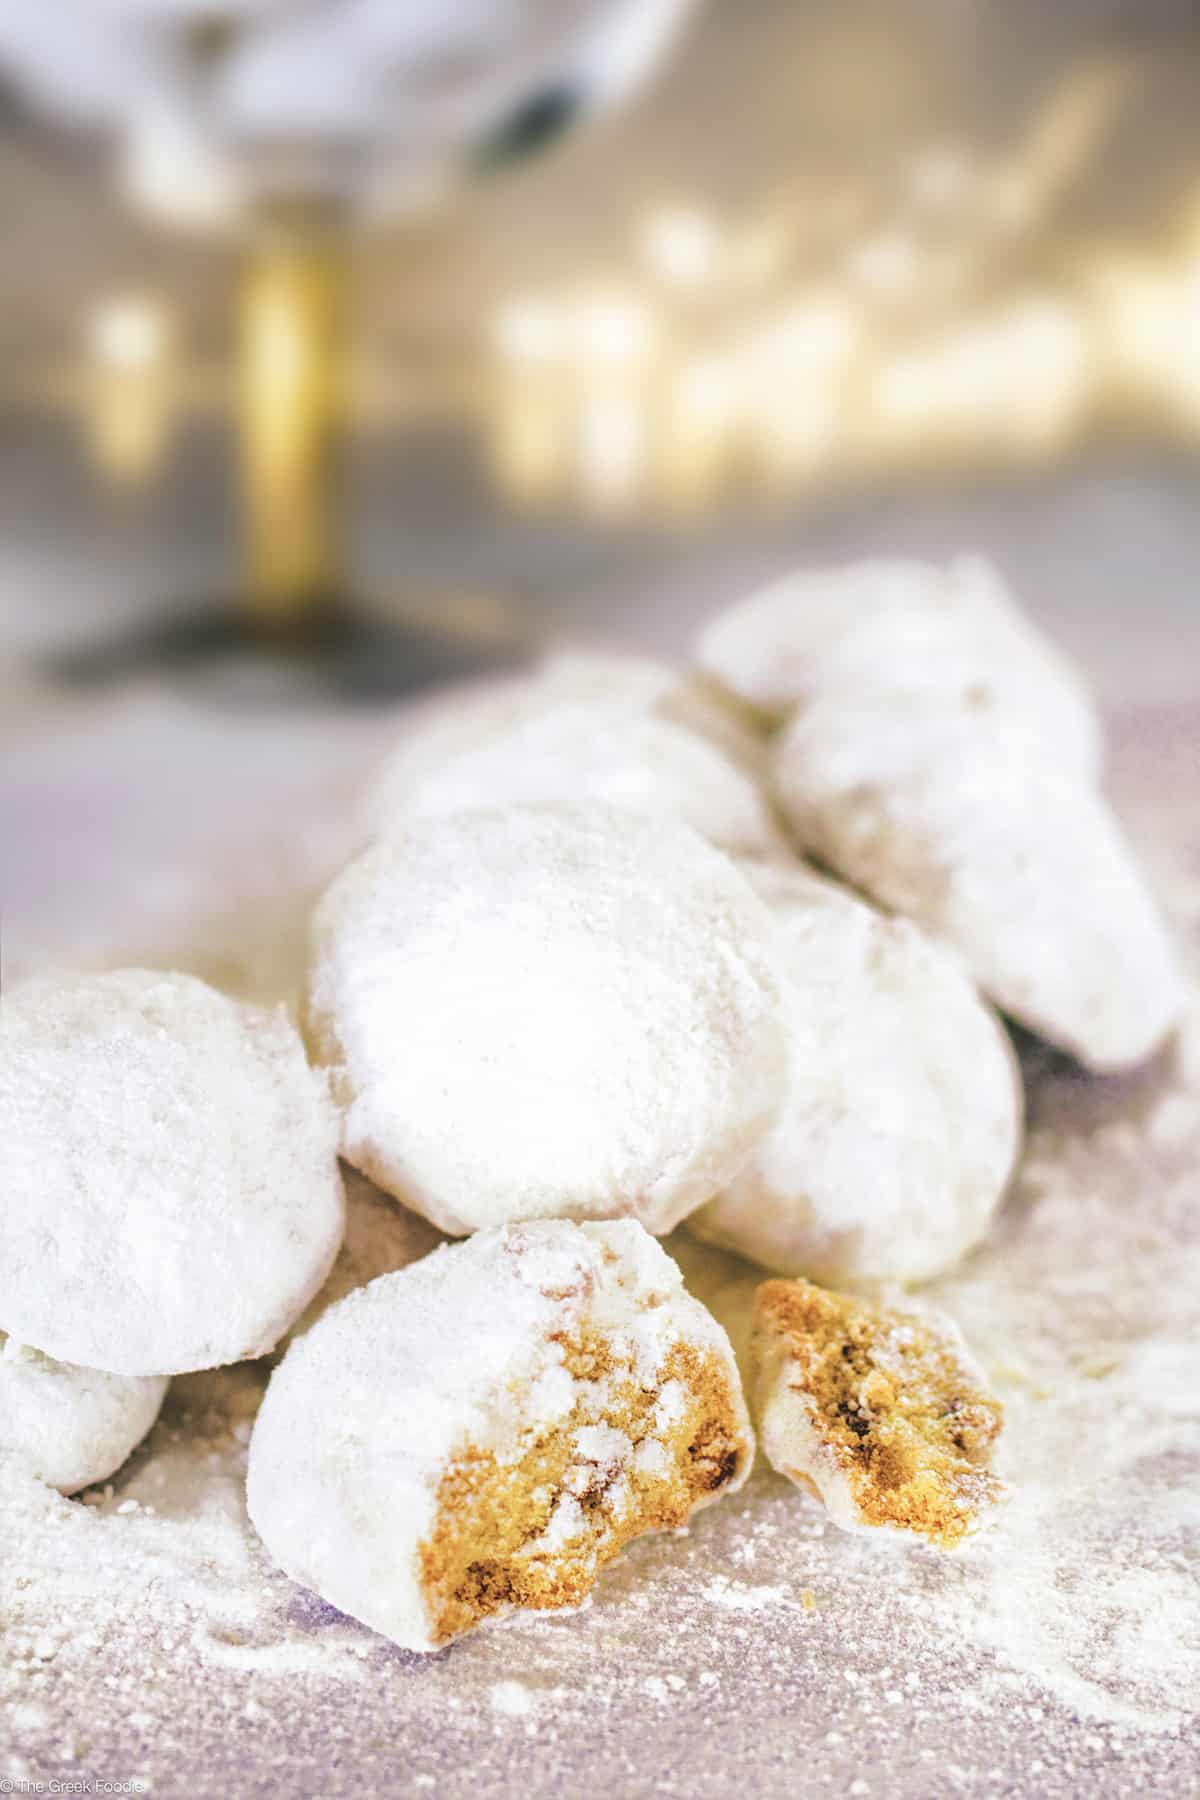 Kourabiedes- Greek Christmas butter cookies covered in powdered sugar on a table, a couple broken in half. At the back fading Christmas lights.